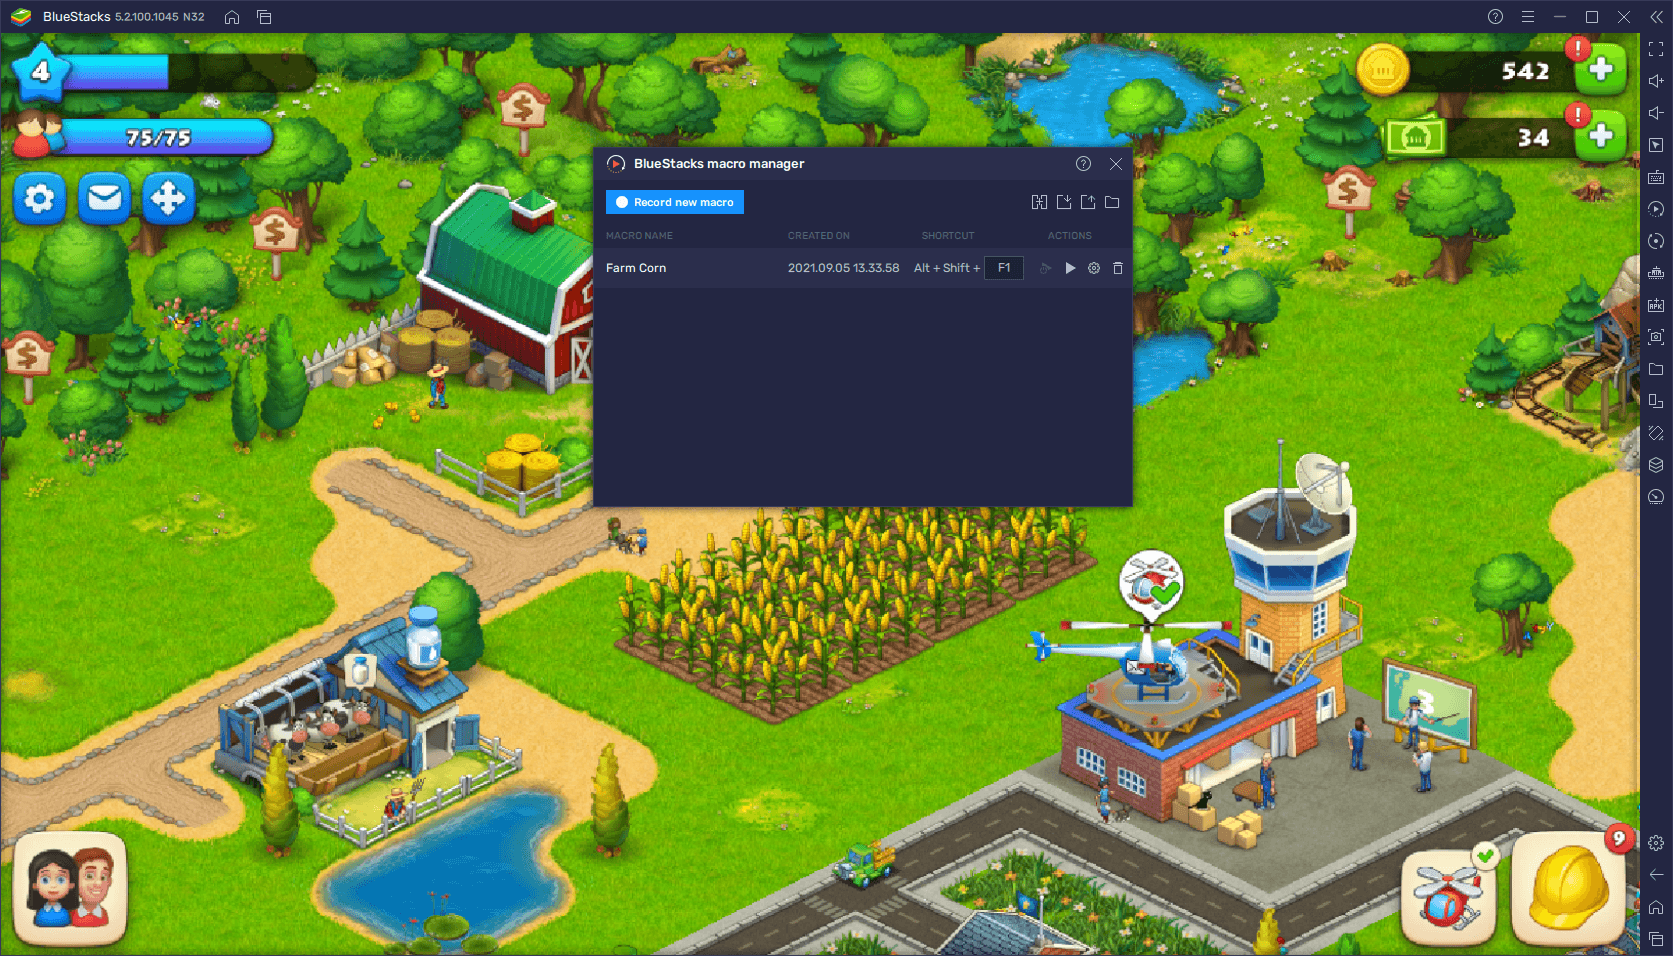 Township on PC - Using BlueStacks’ Tools to Develop Your Town in Record Time